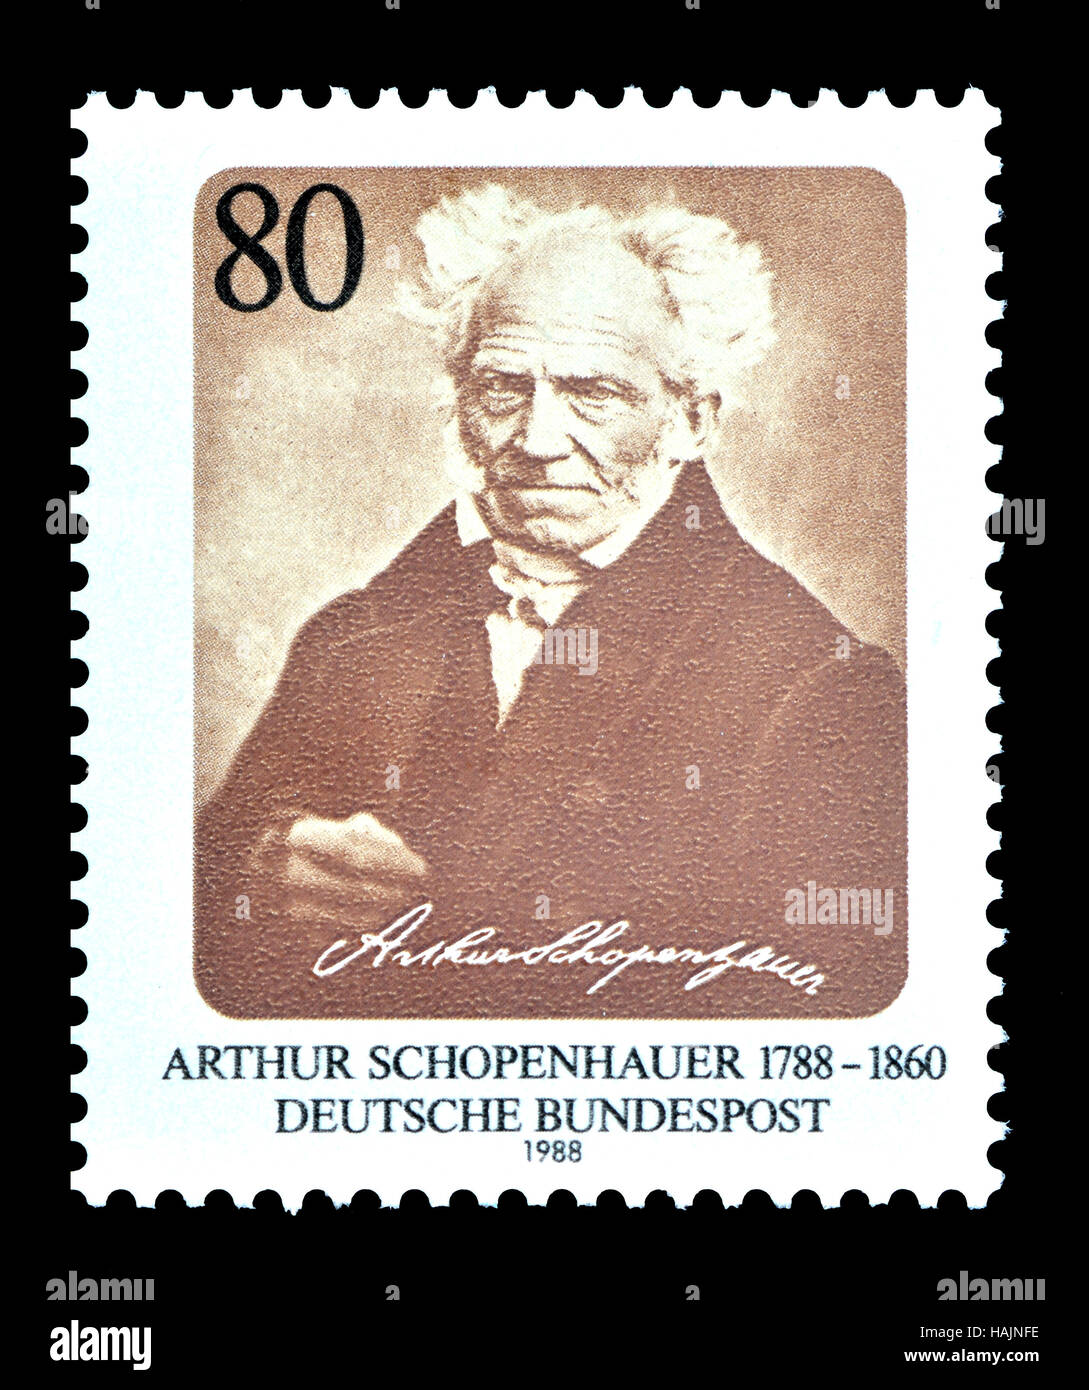 German postage stamp (1988) : Arthur Schopenhauer (1788-1860) German philosopher, best known for his 1818 work The World as Will and Representation Stock Photo